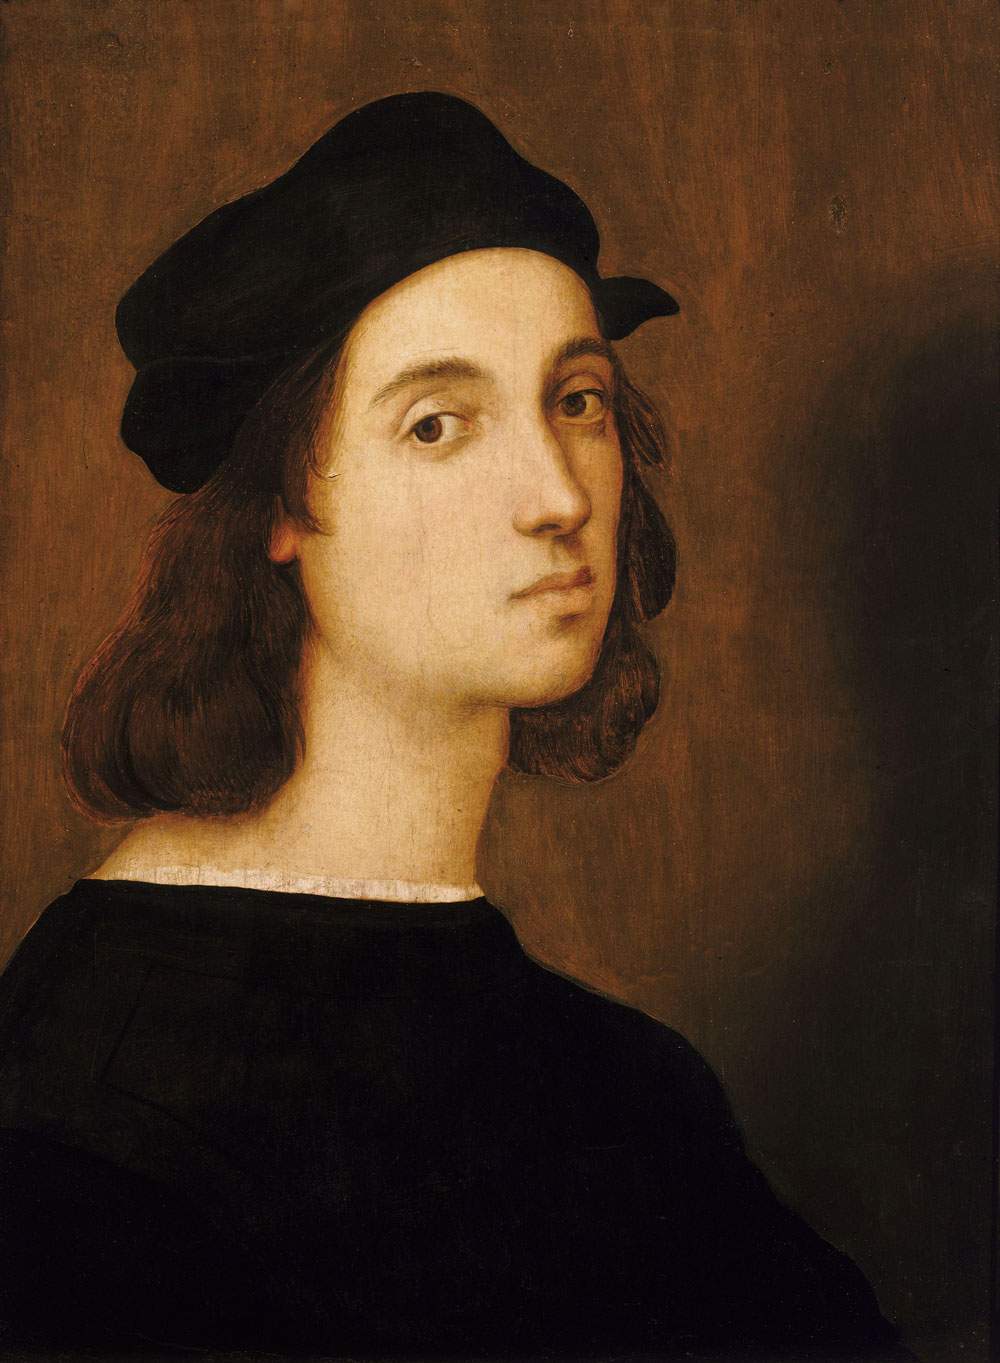 After exhibition in San Francisco, Raphael's Self-Portrait returns to Florence.